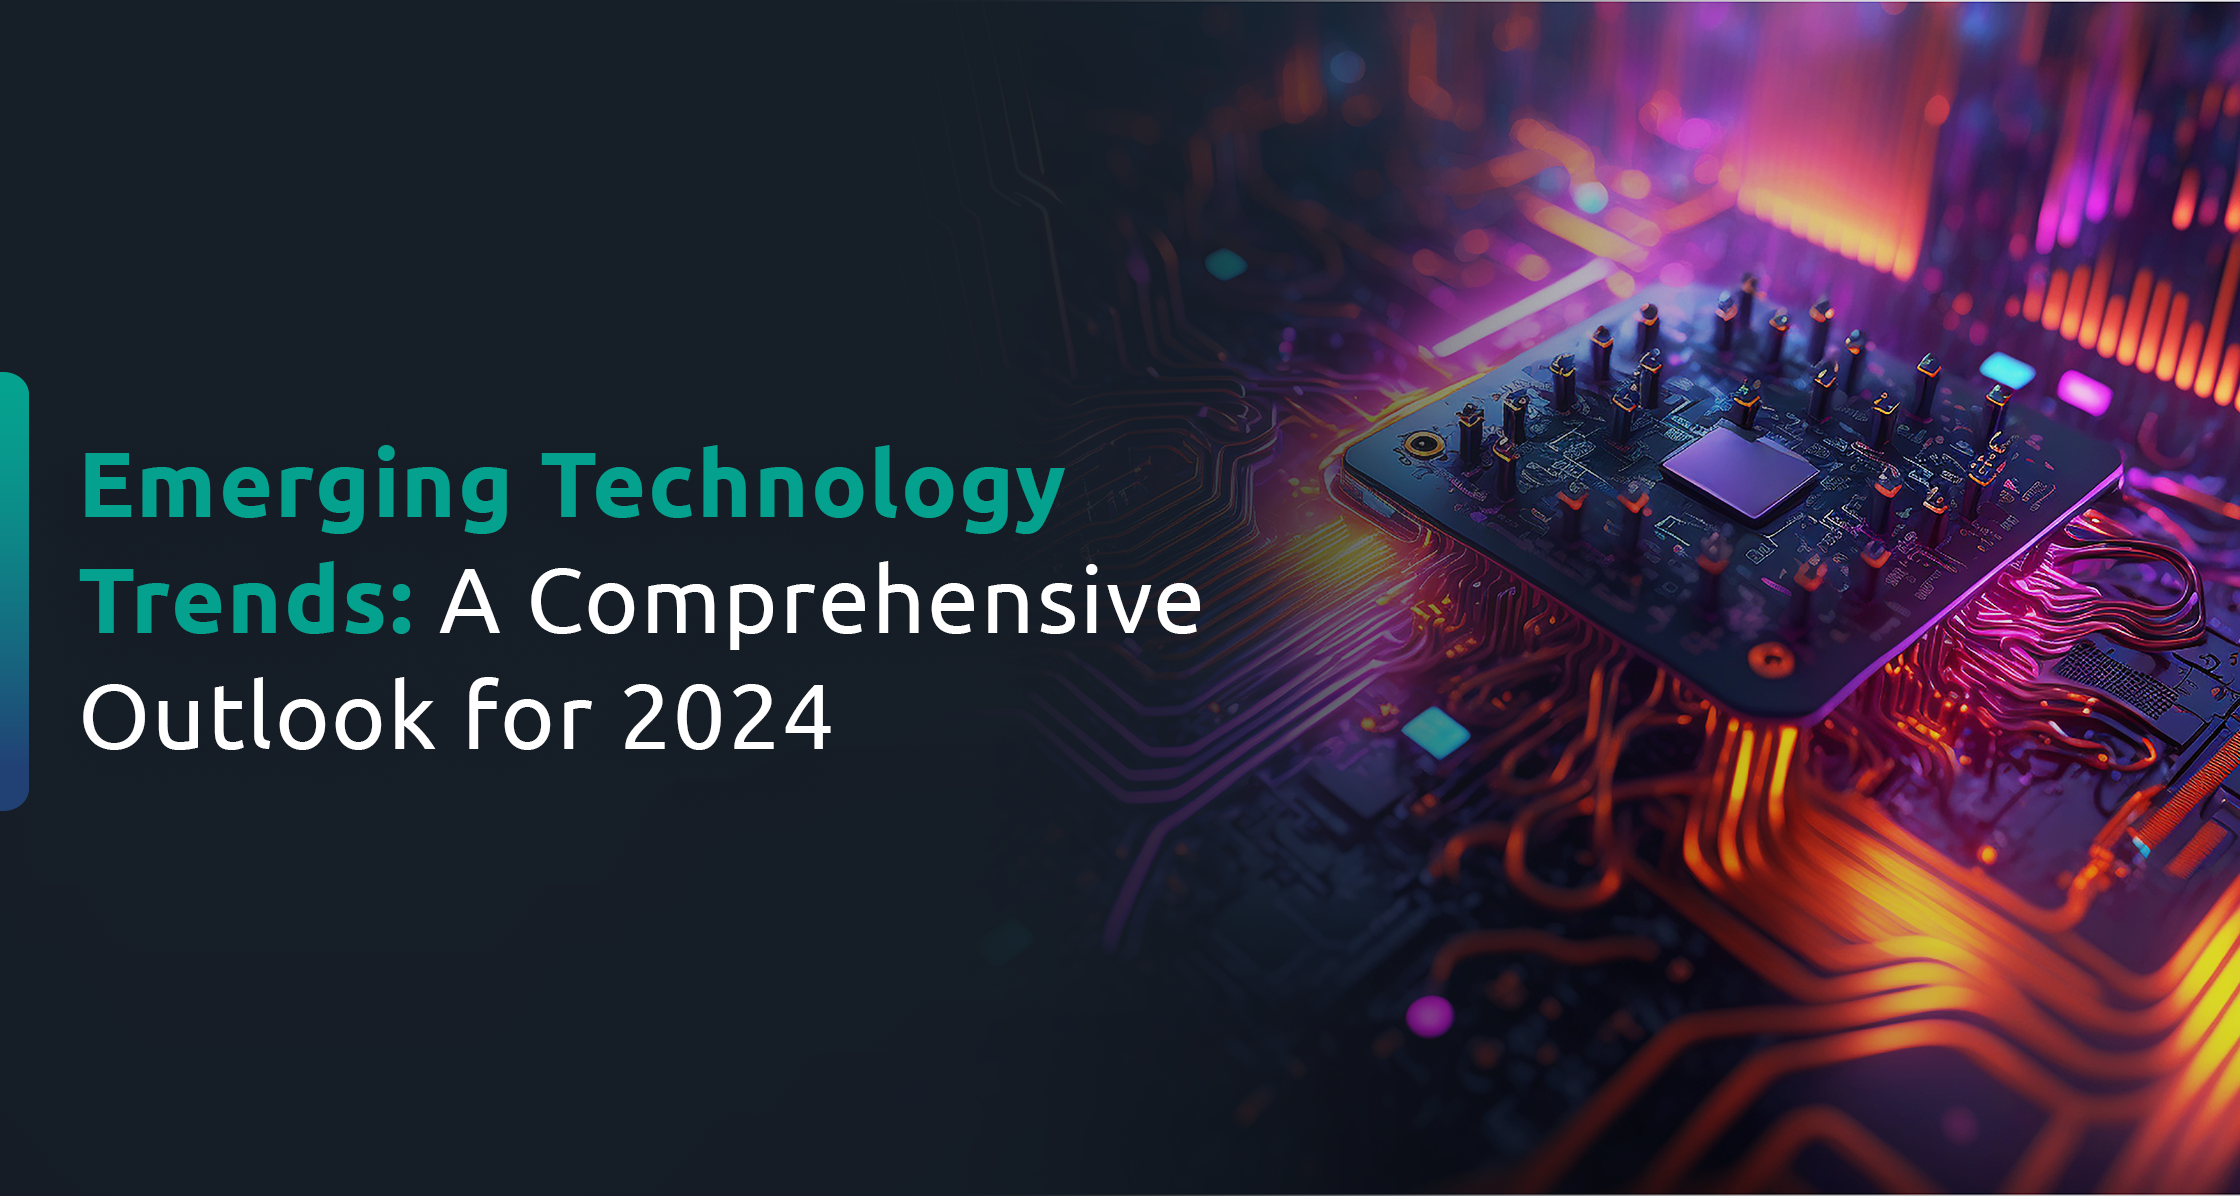 Emerging Technology Trends: A Comprehensive Outlook for 2024